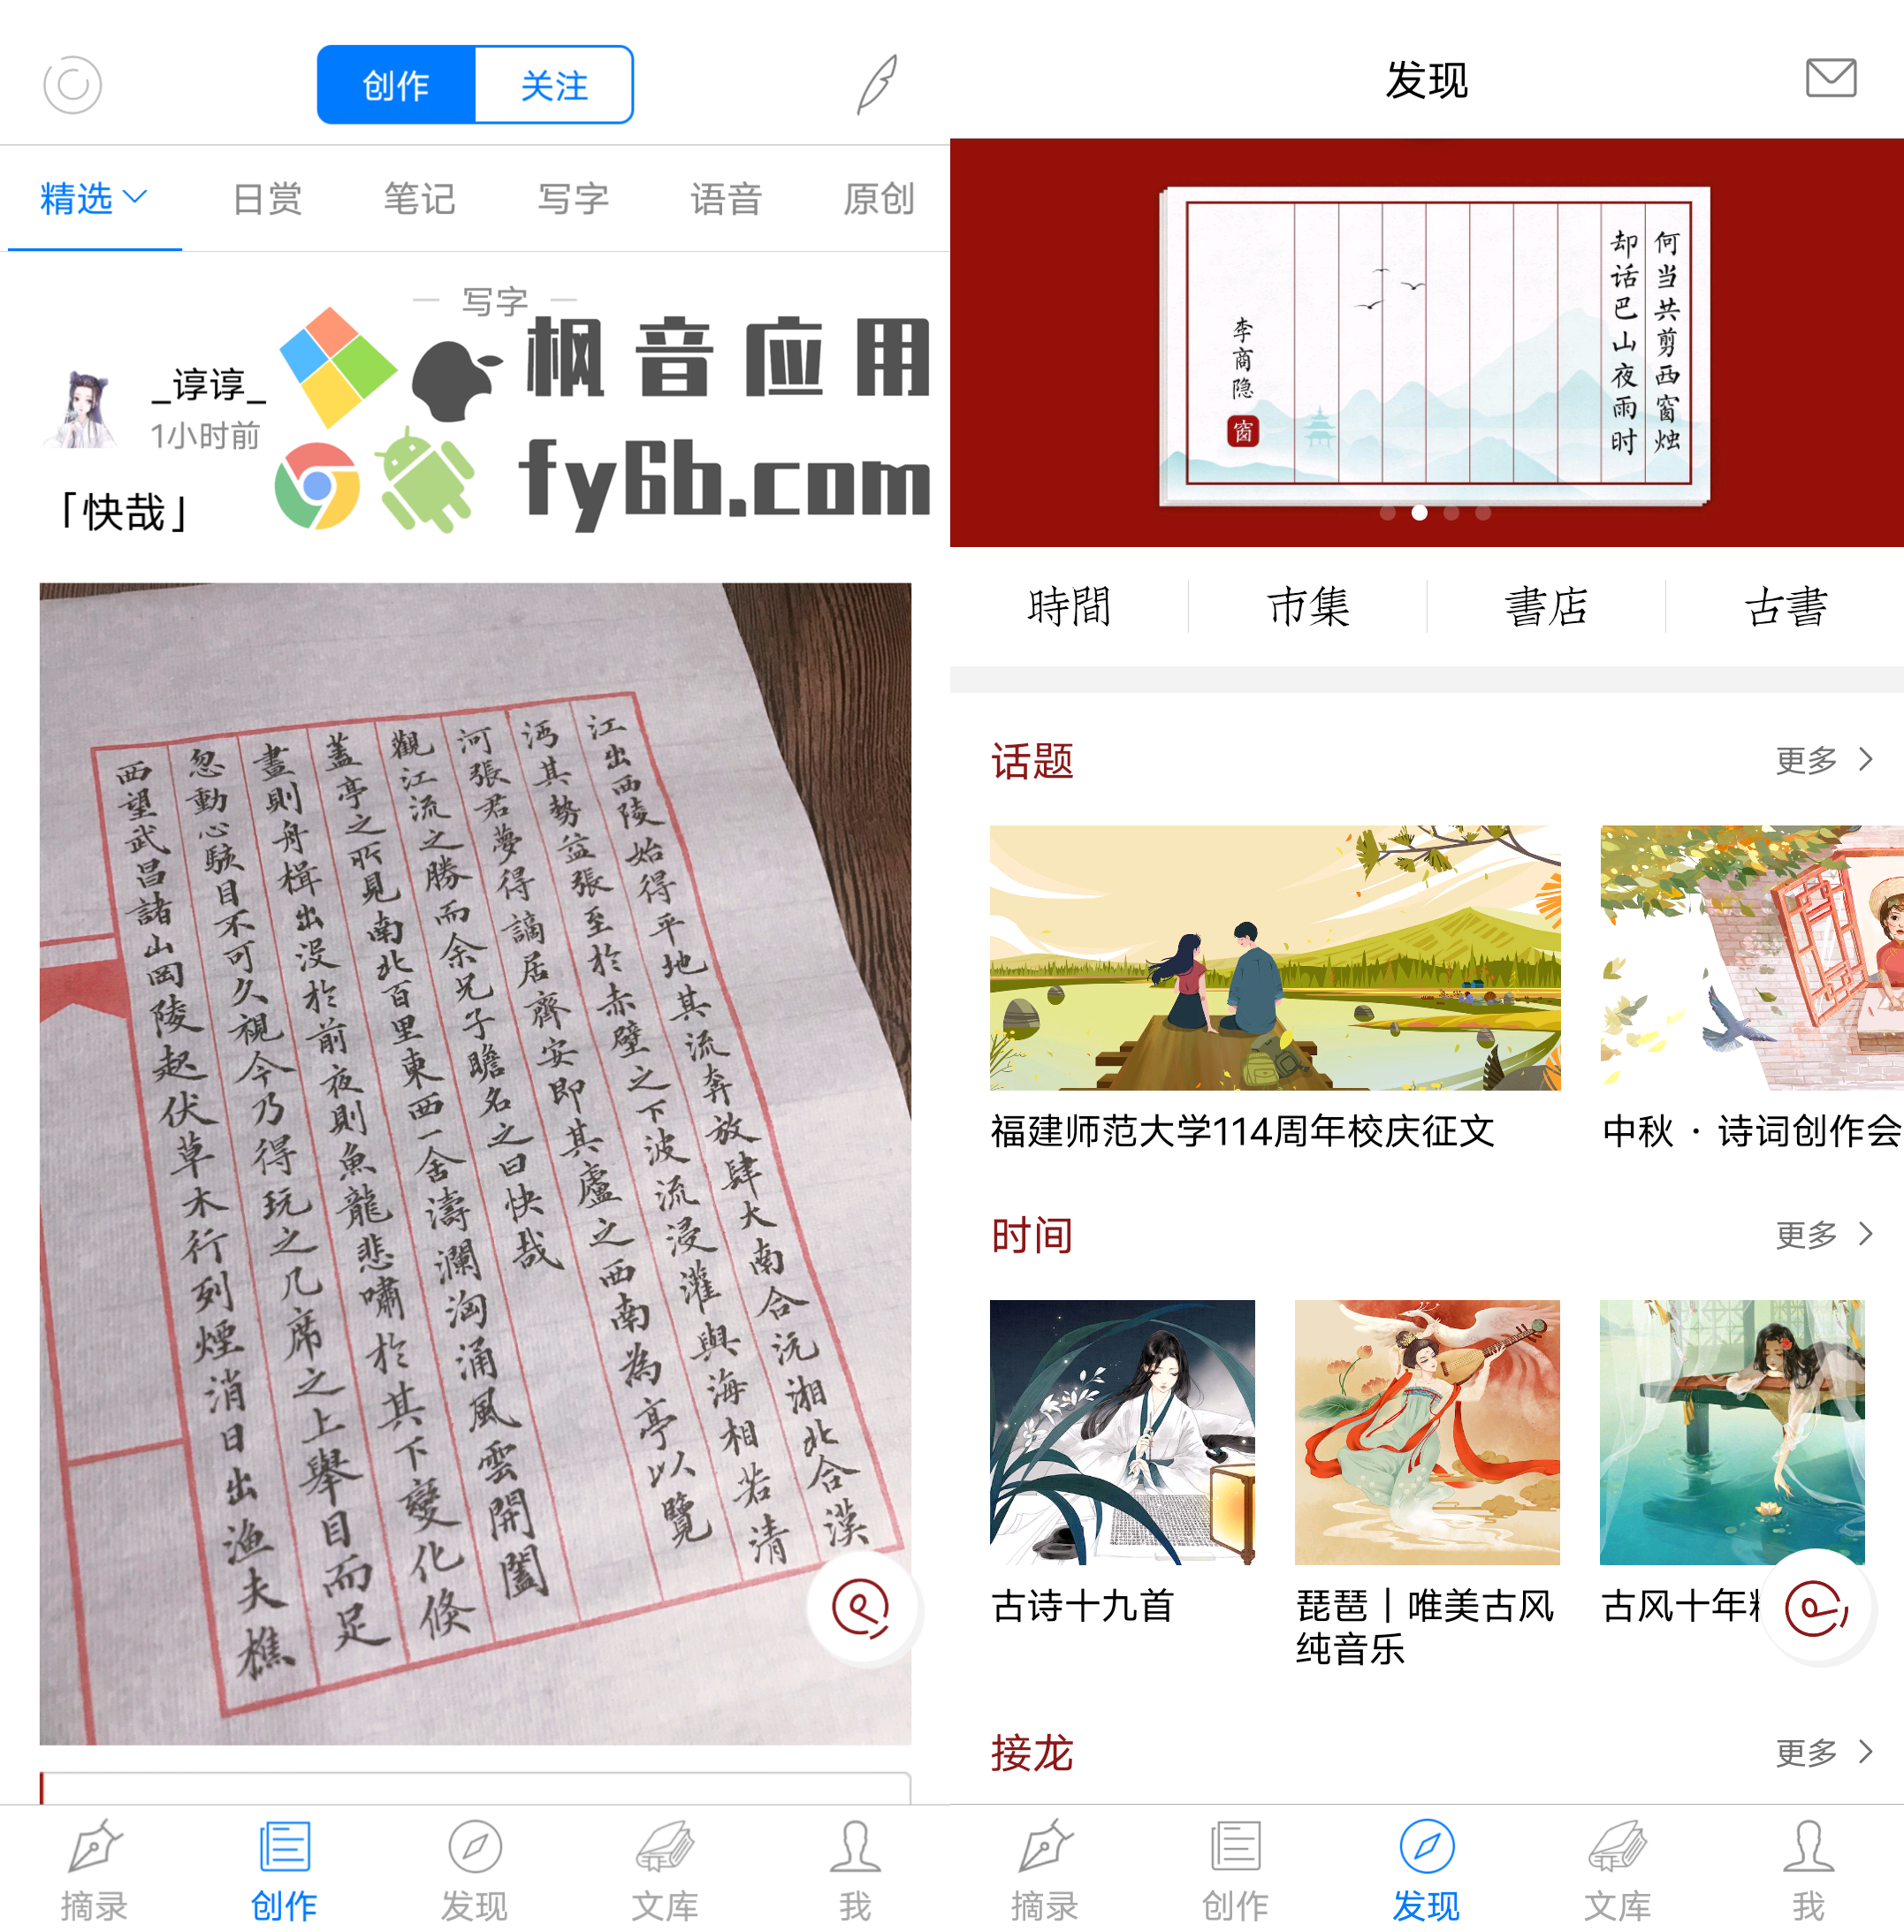 Android 西窗烛_3.21.2